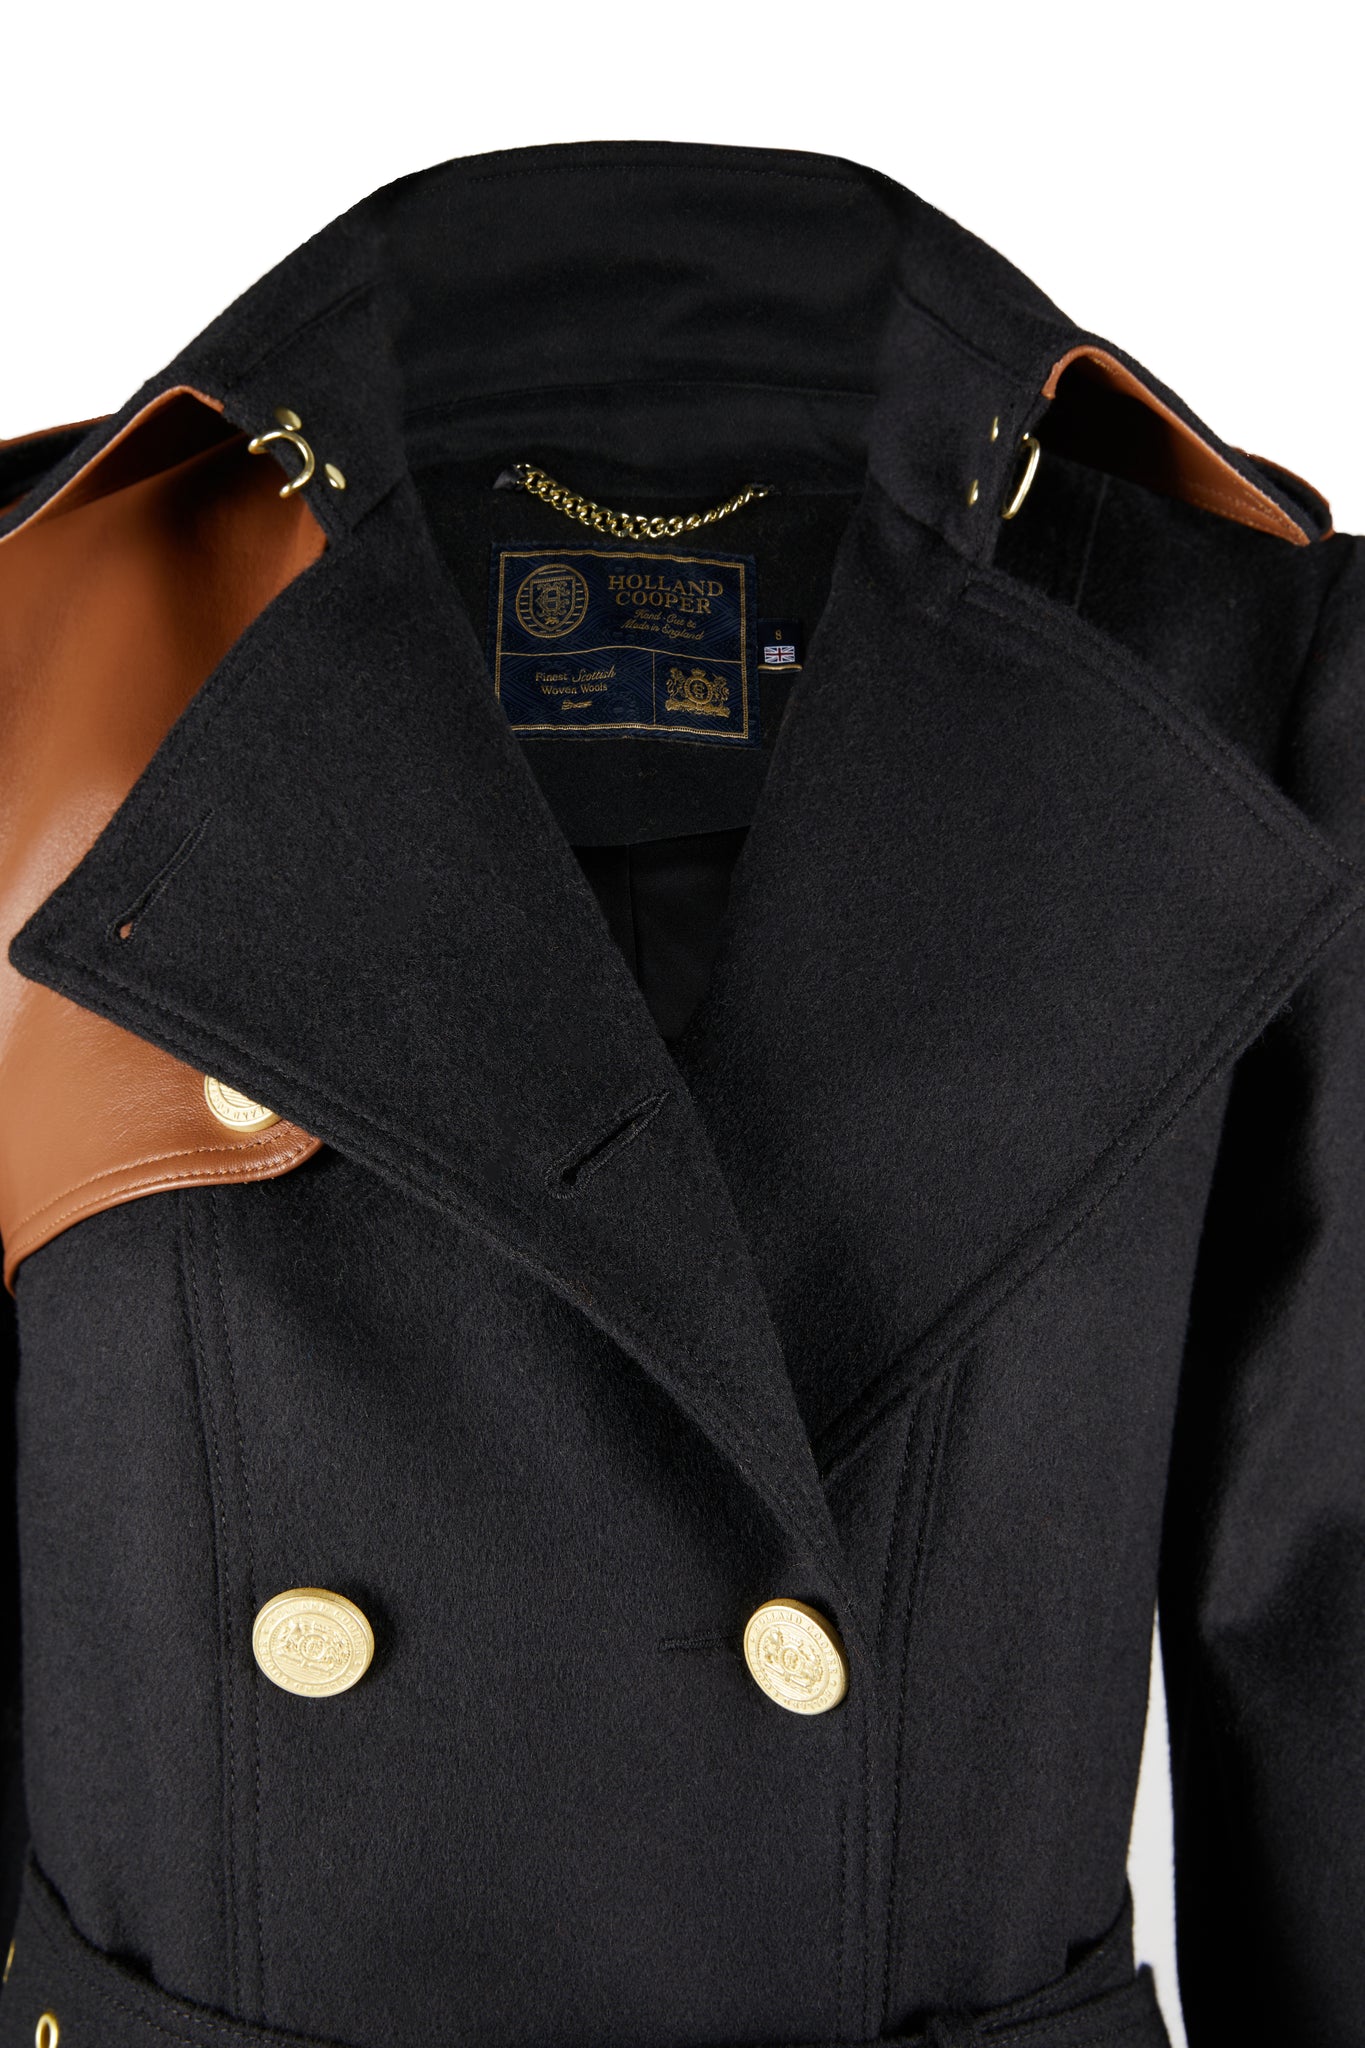 Open collar detail of Womens black and tan brown leather detailed with gold hardware knee length wool trench coat